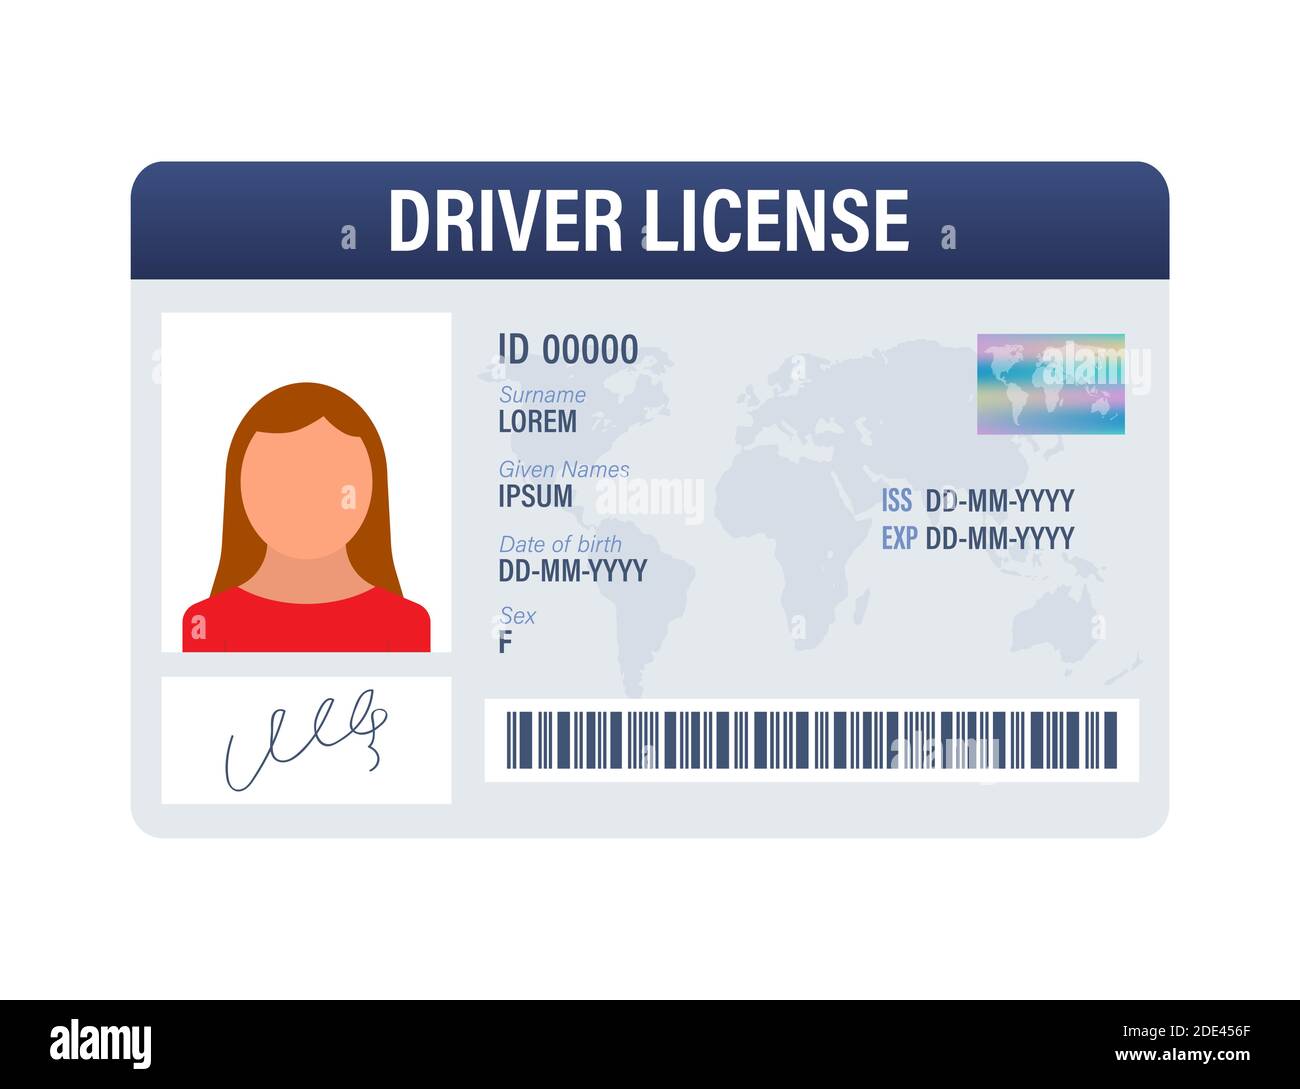 Man driver license plastic card template. Id card. Vector stock illustration. Stock Vector